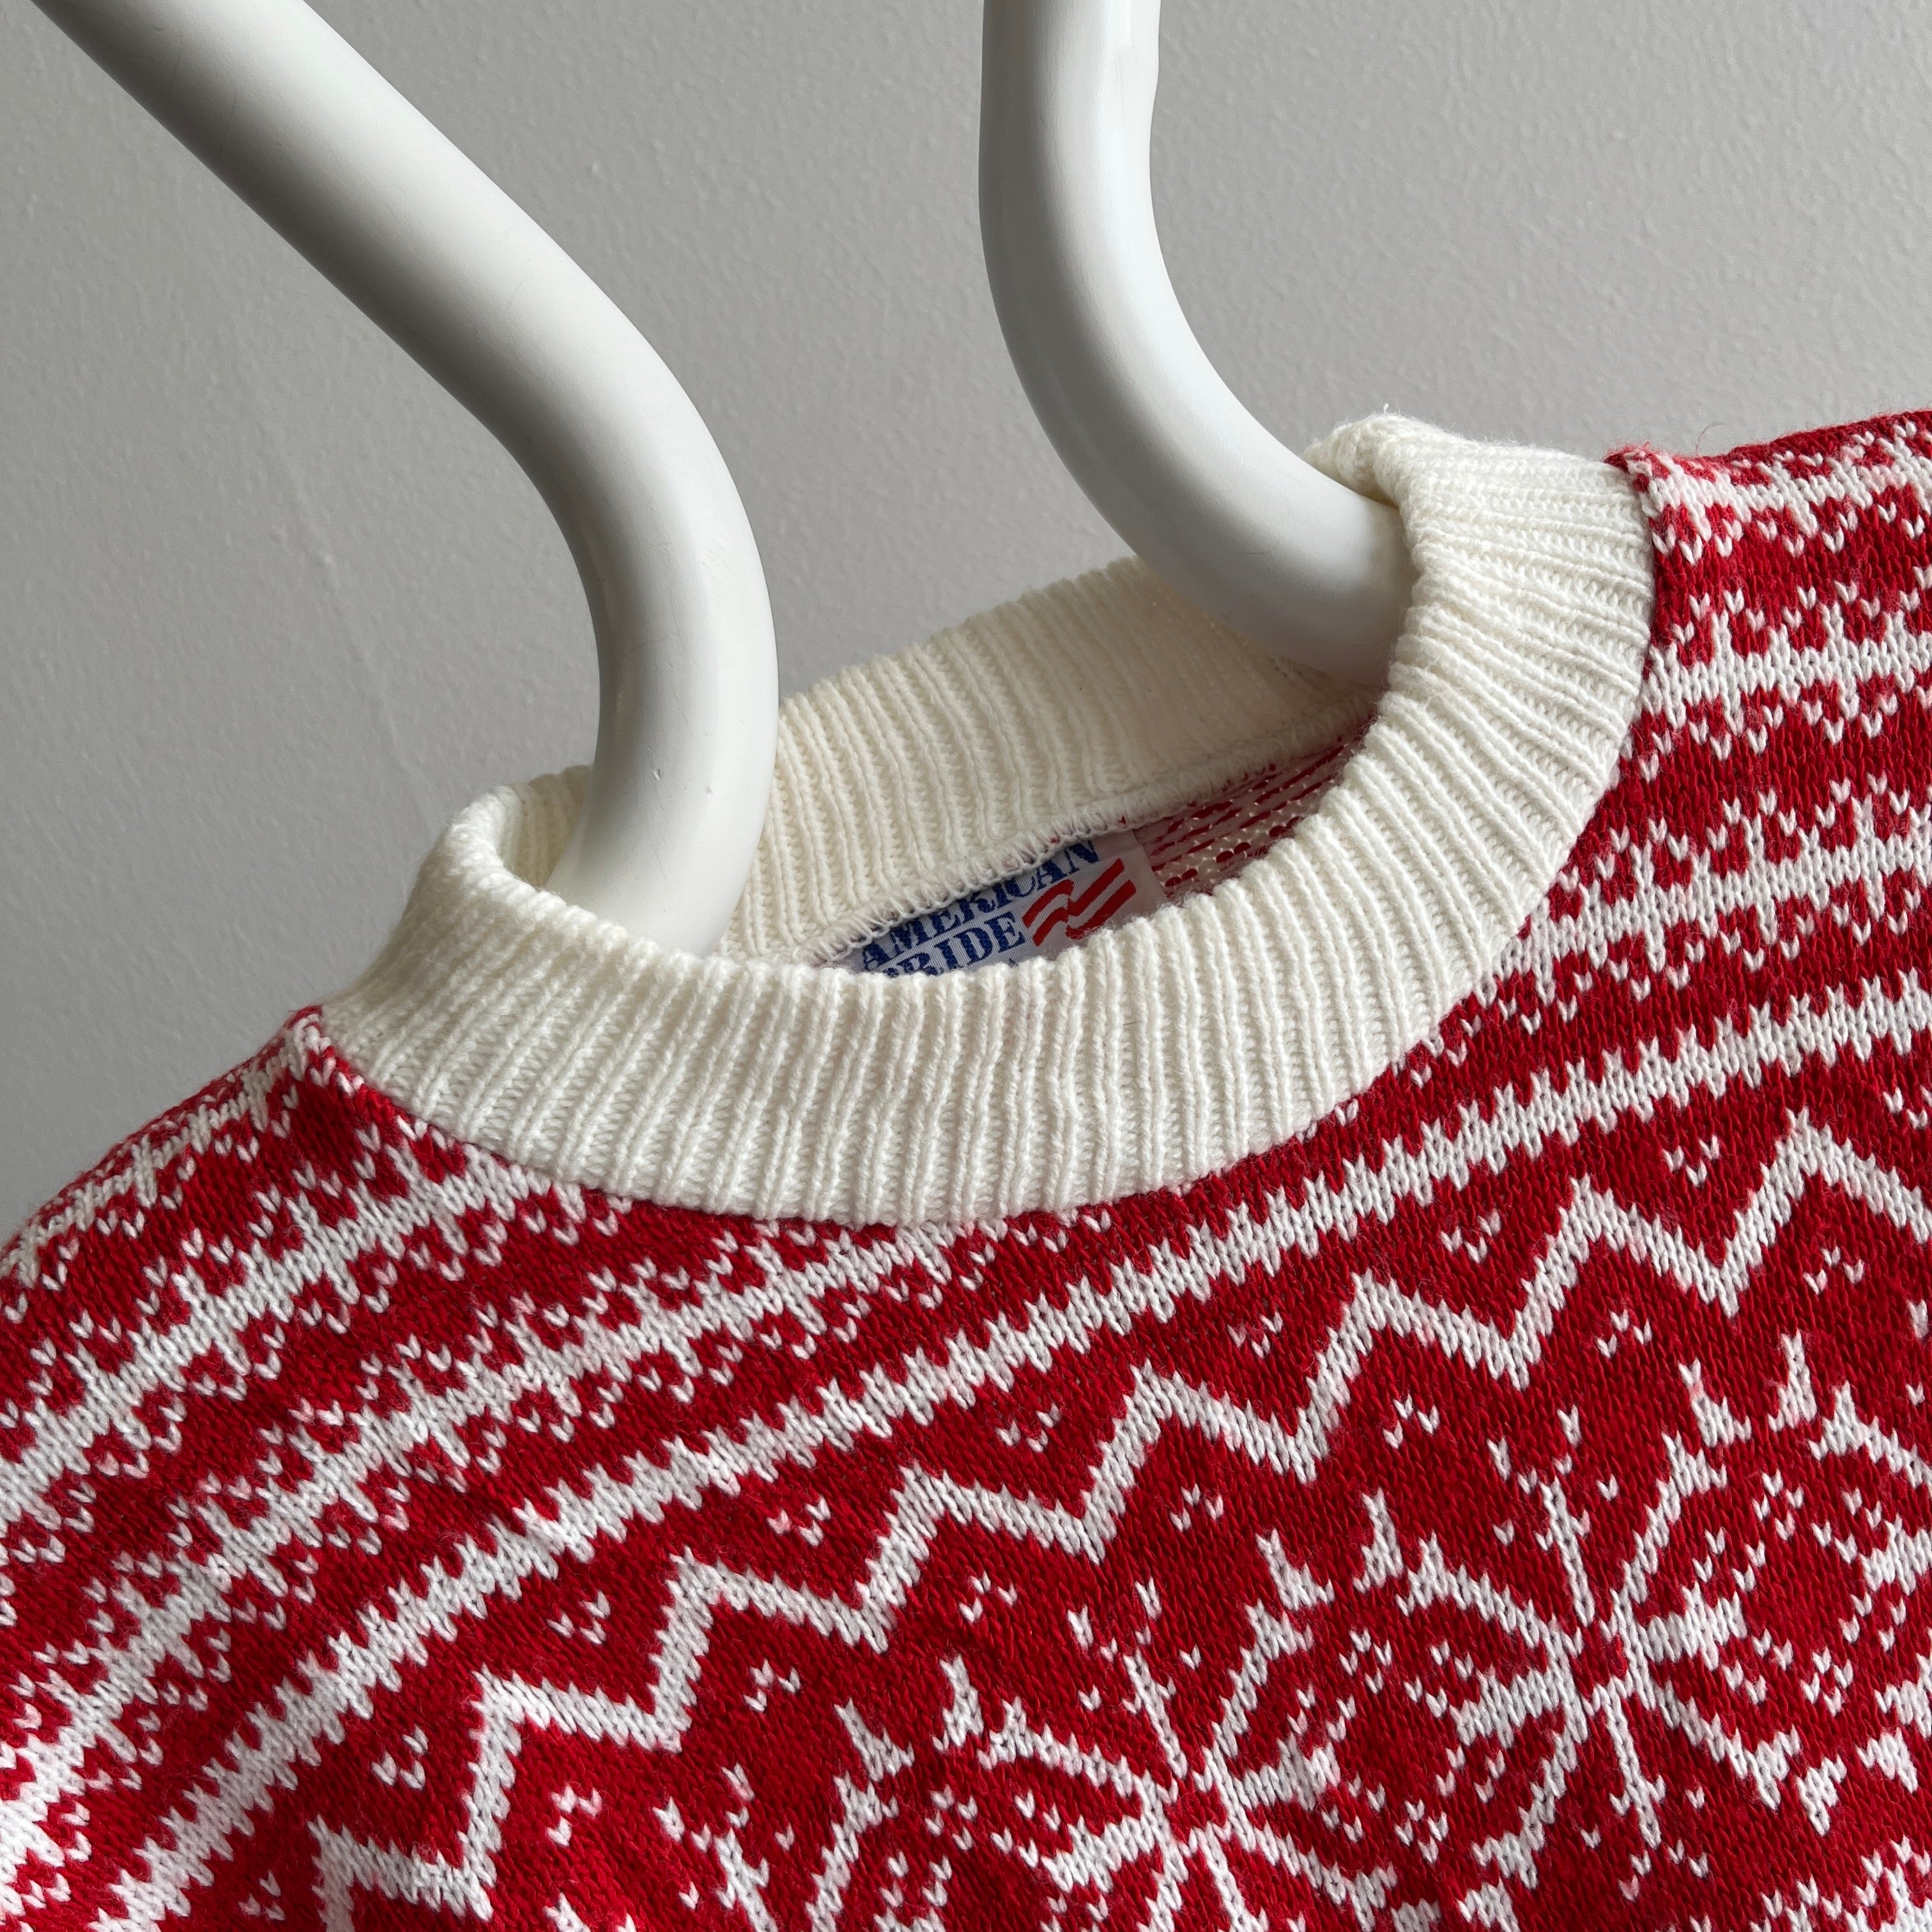 1980s Acrylic Red and White Snow Flake Sweater